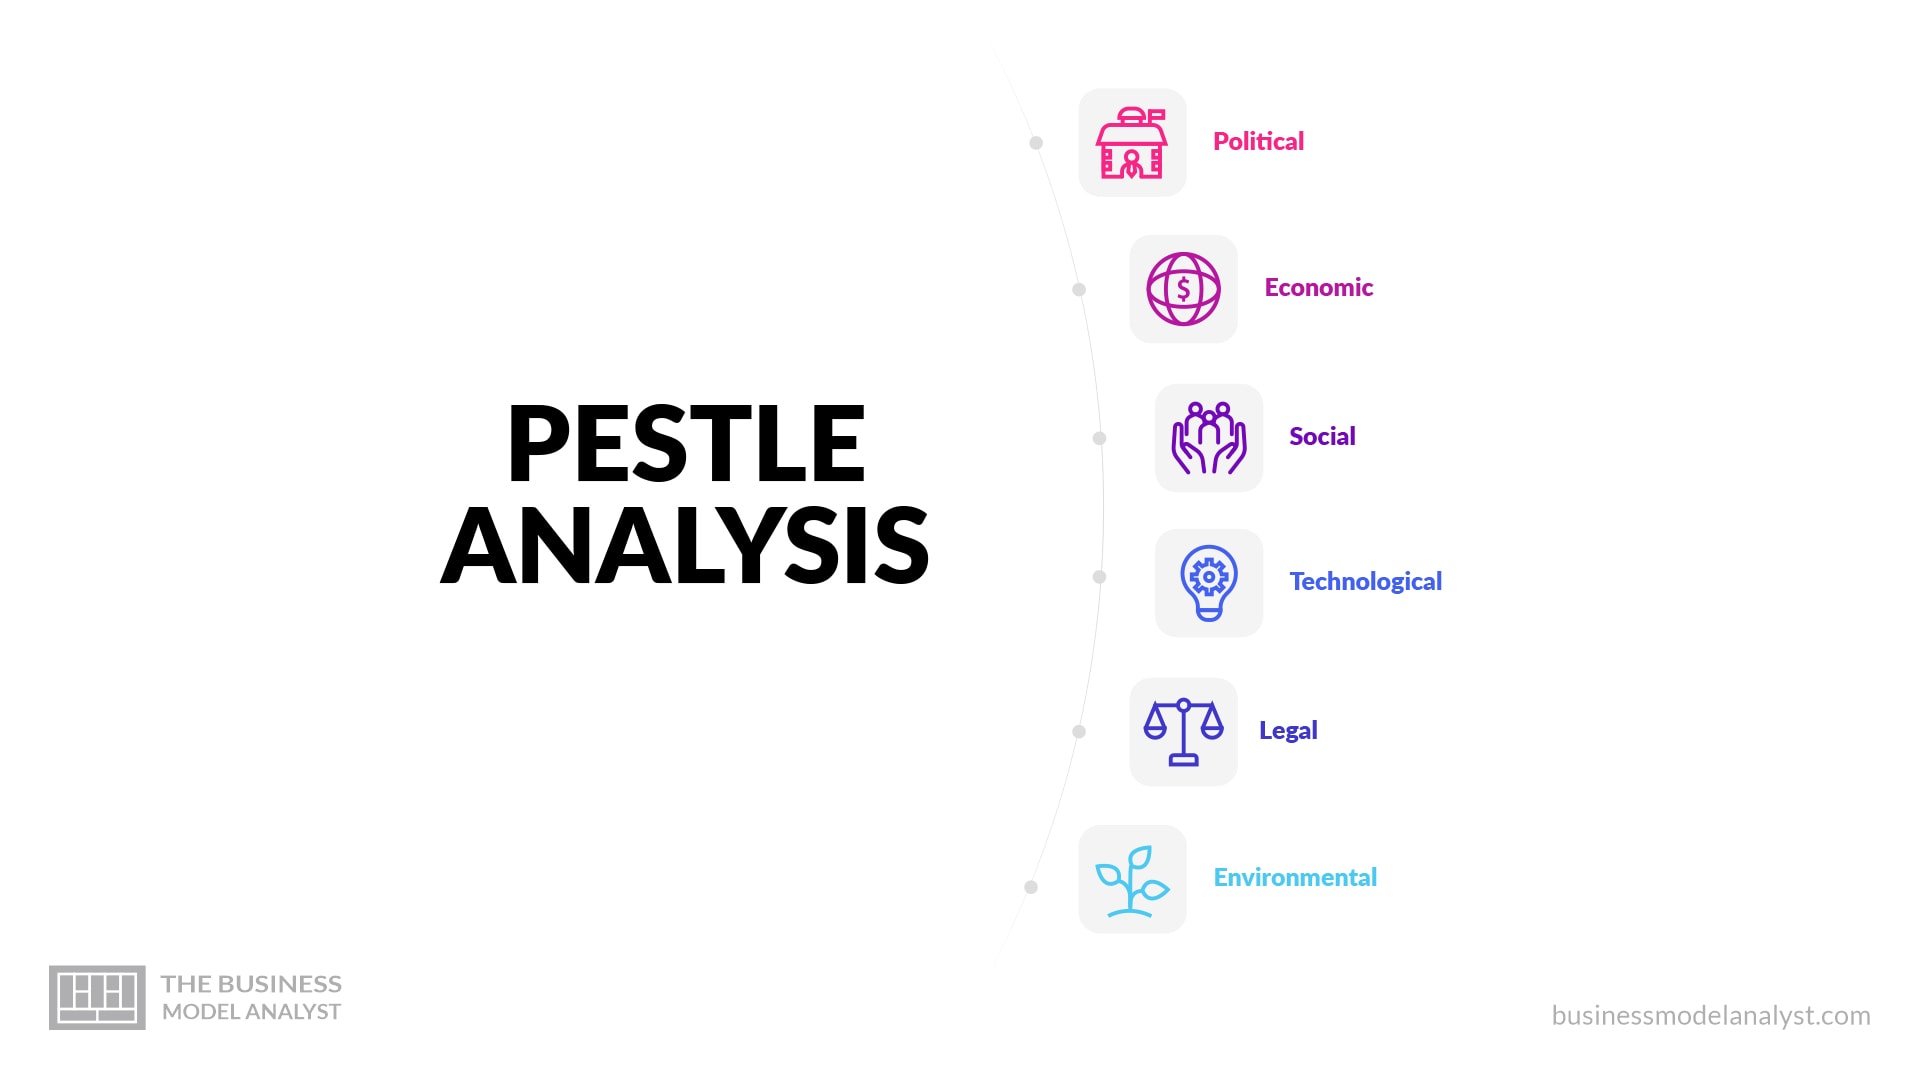 What Is Pestle Analysis Understanding The External Factors Impacting Your Business